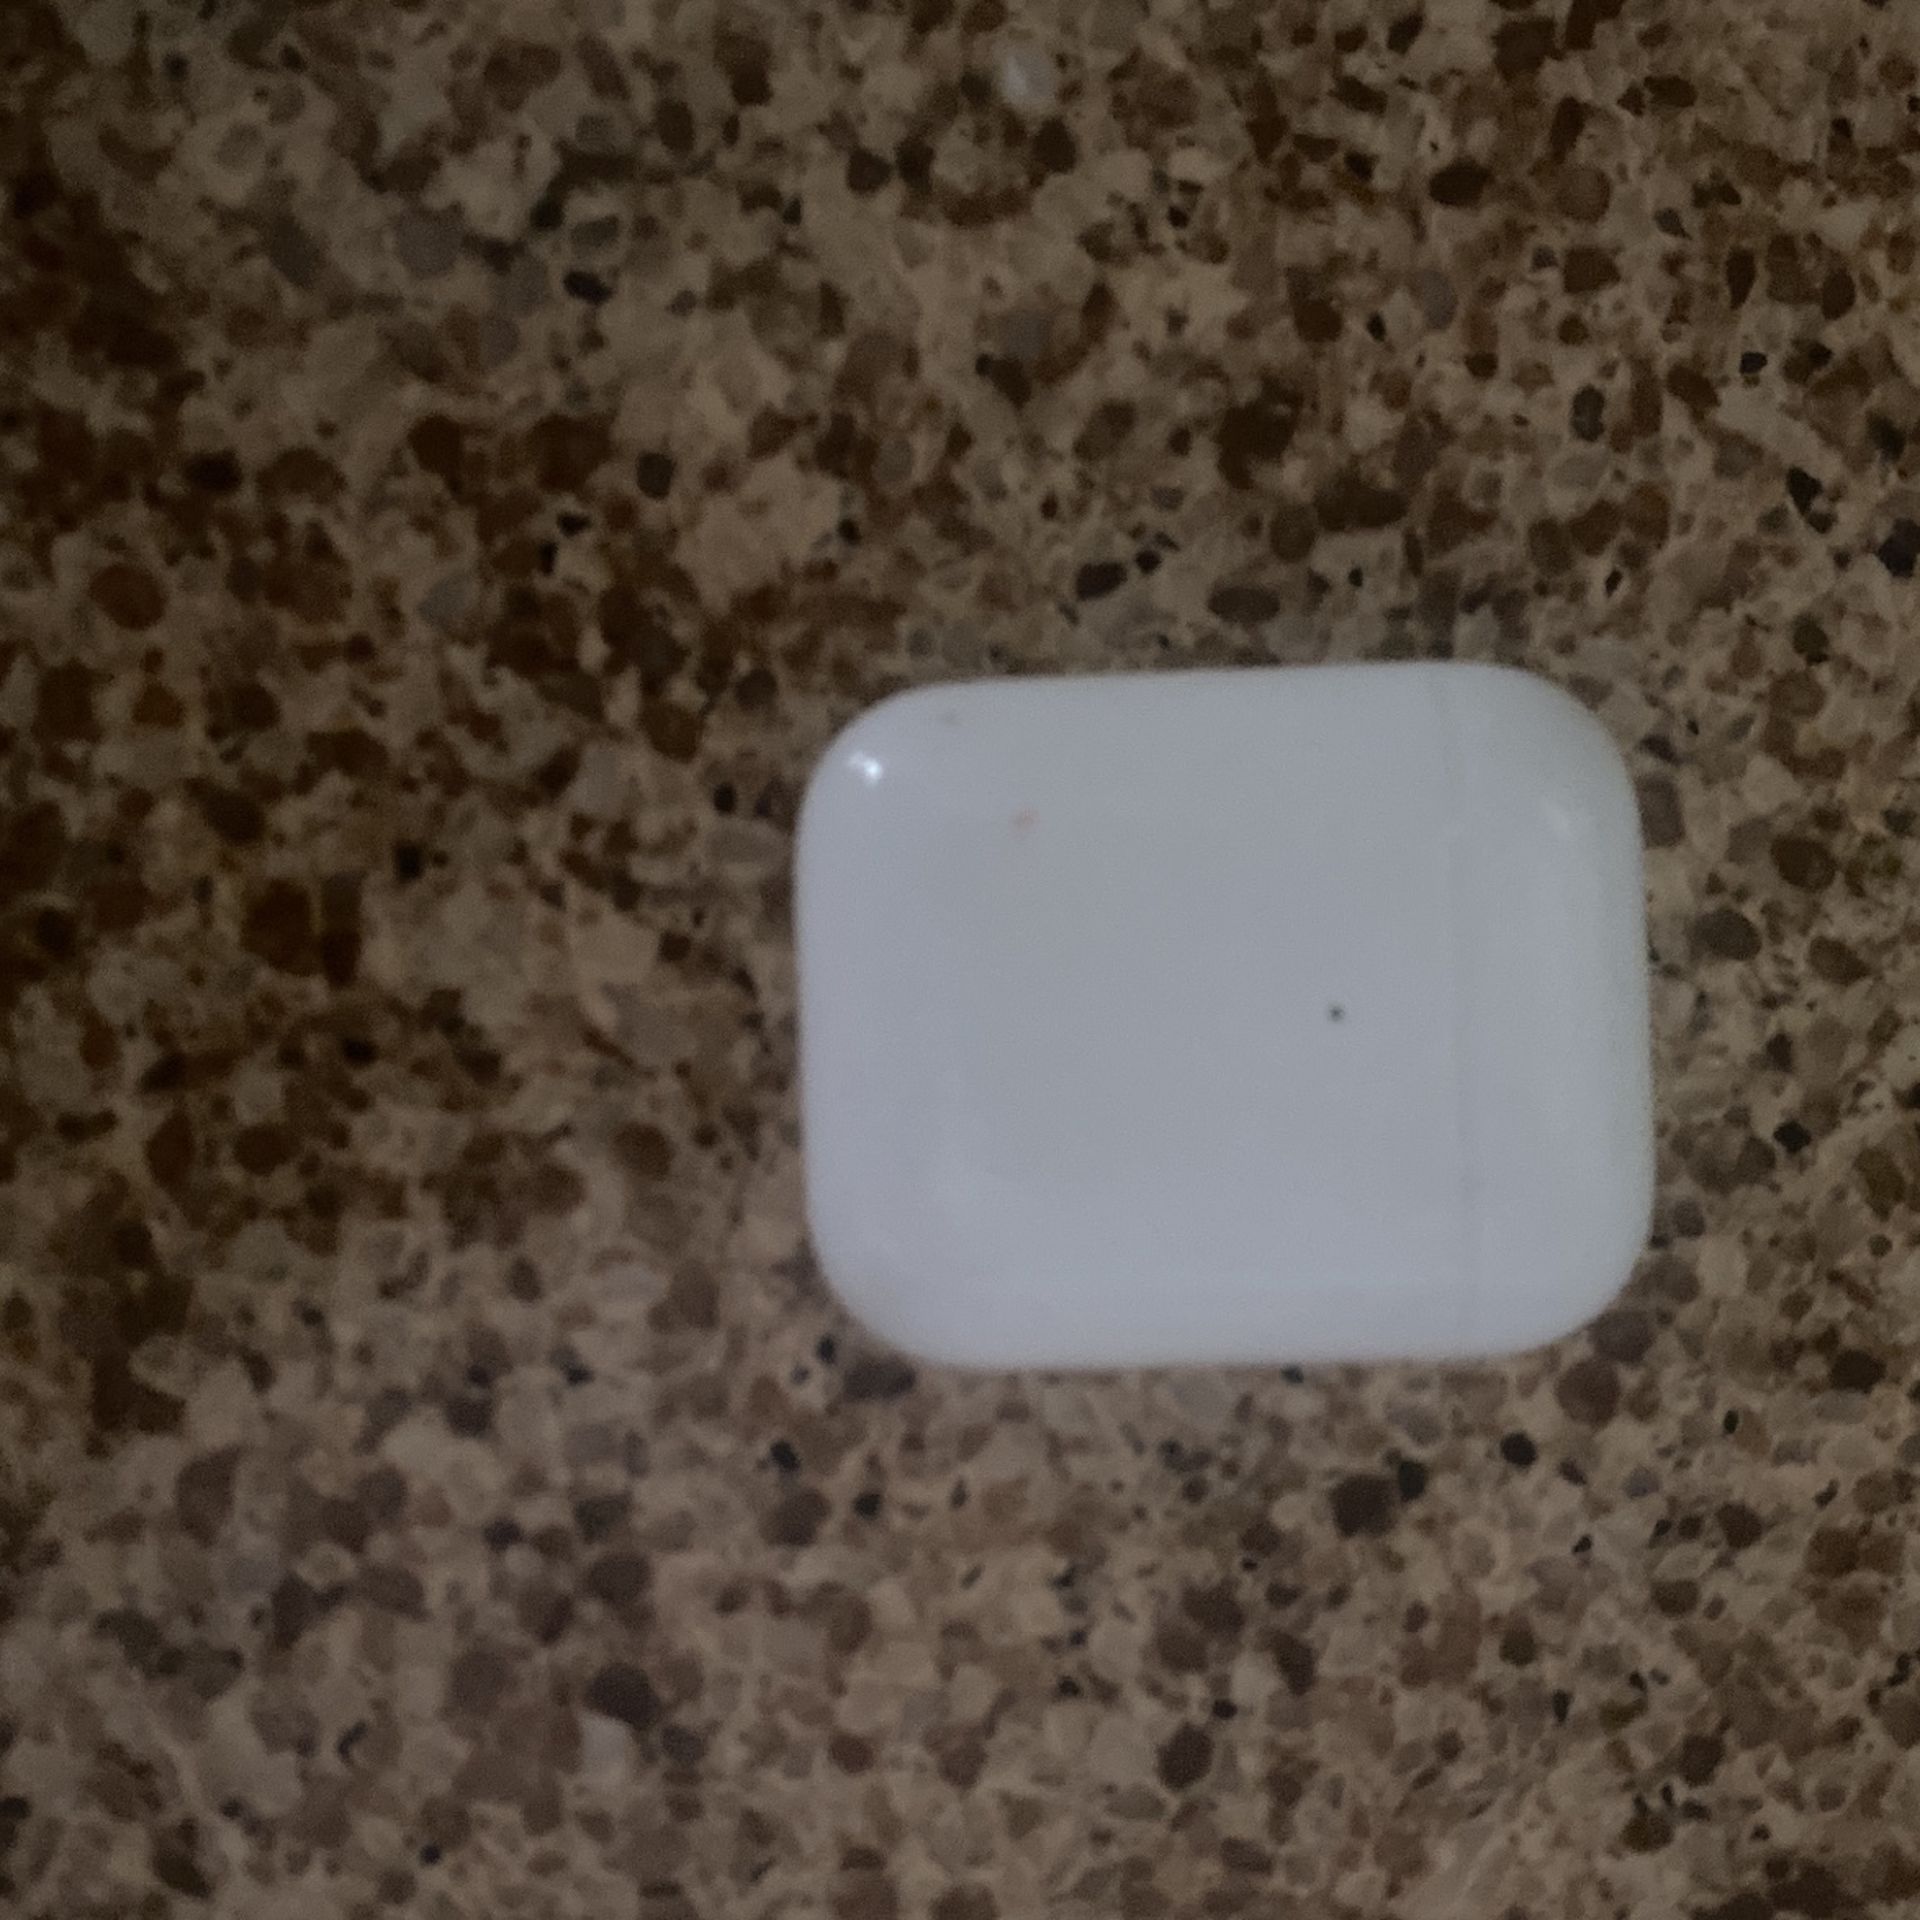 No airpods just the cause works brand new but just dosent look, basically a replacement case